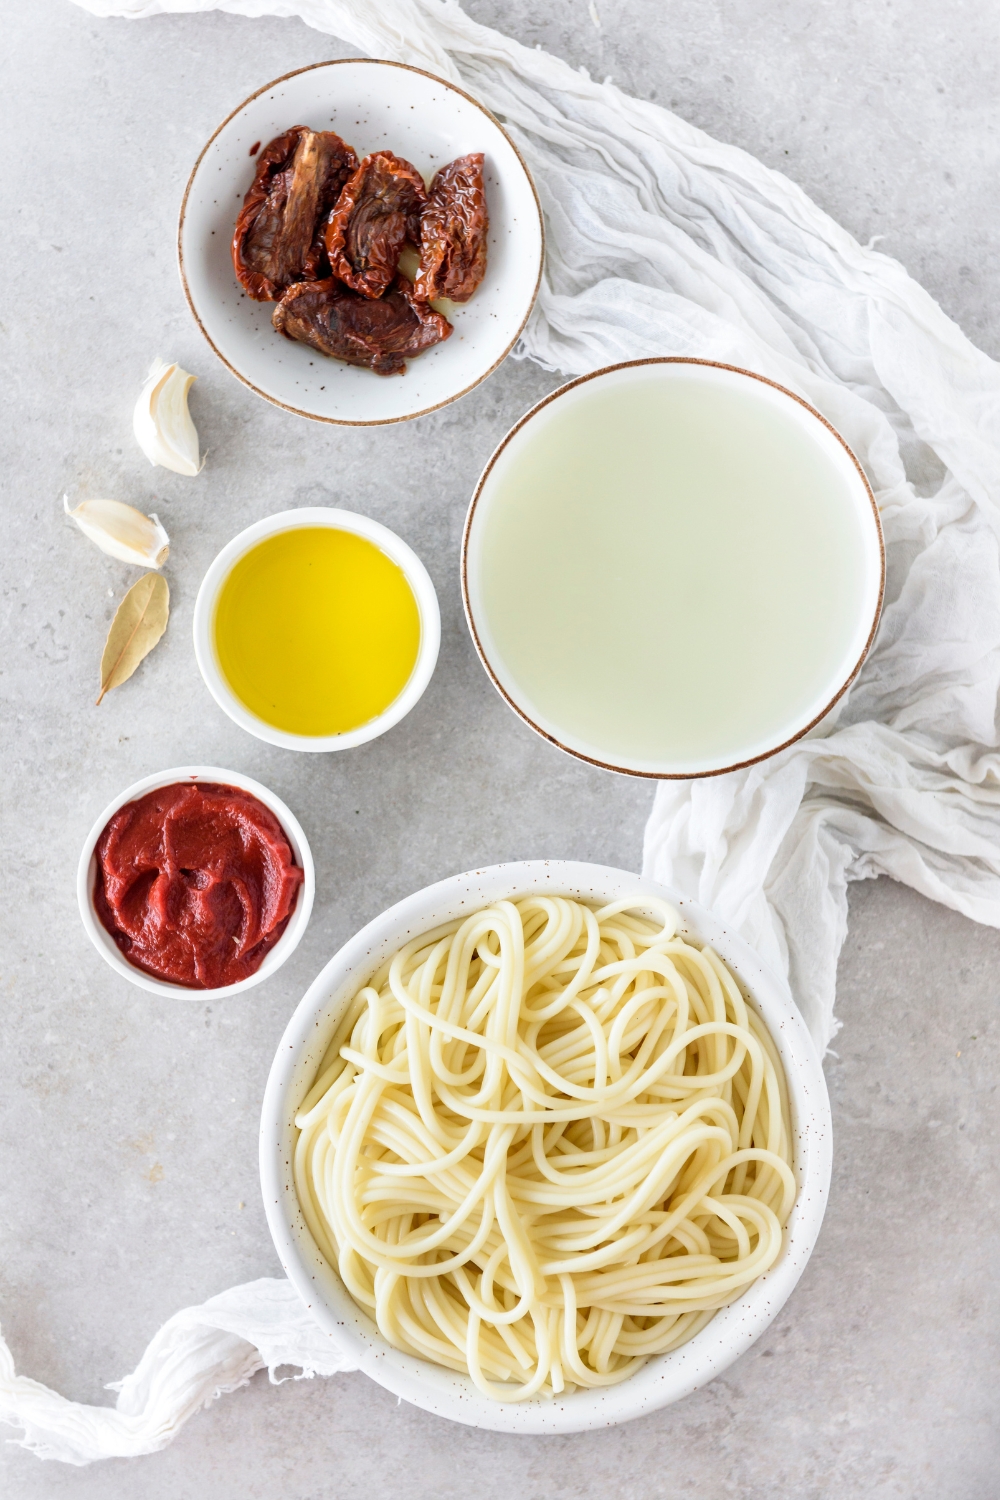 An assortment of ingredients including bowls of spaghetti noodles, sundried tomatoes, tomato paste, oil, and water.